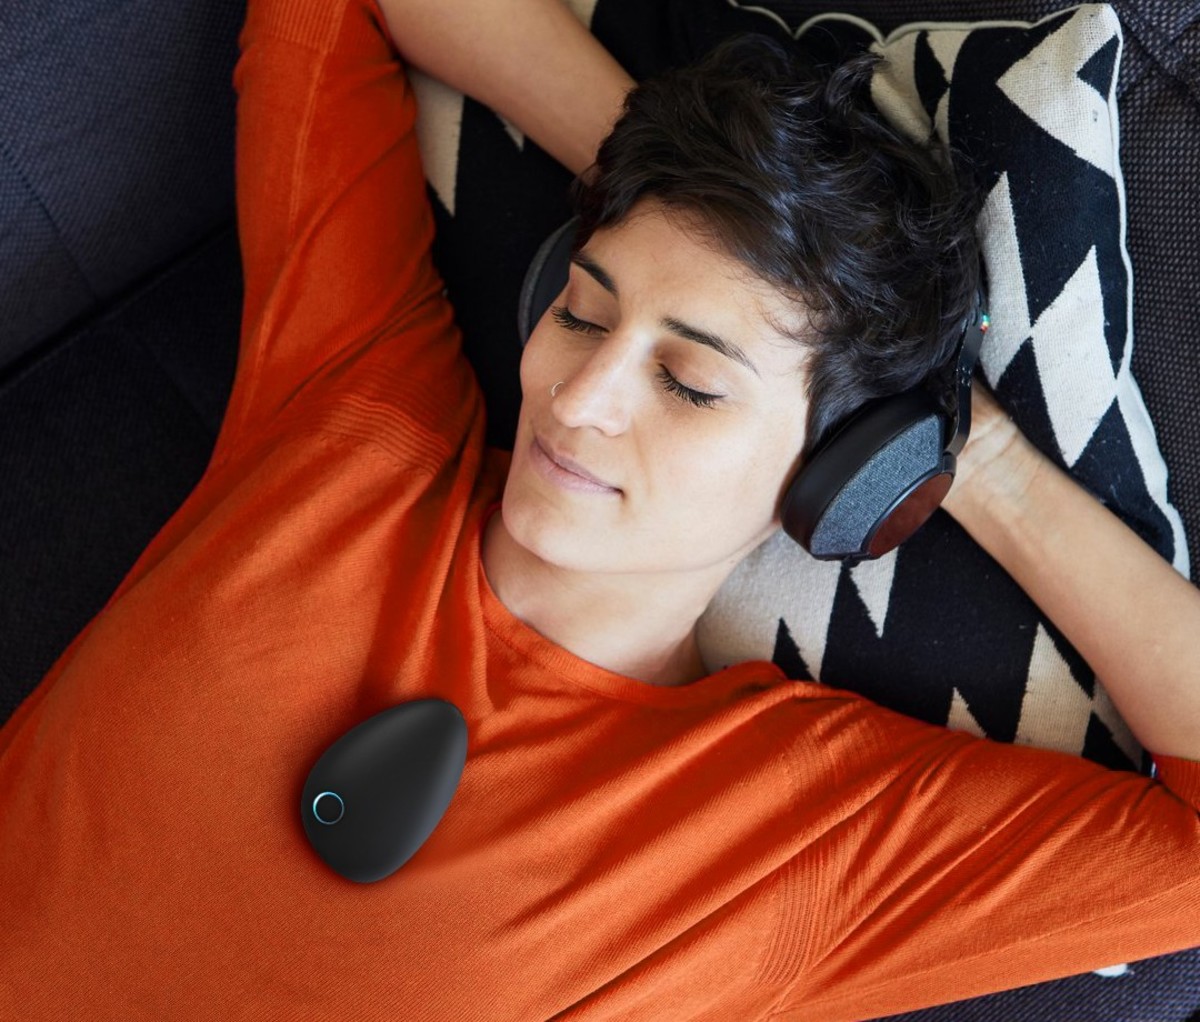 Woman lying down with Sensate relaxation device